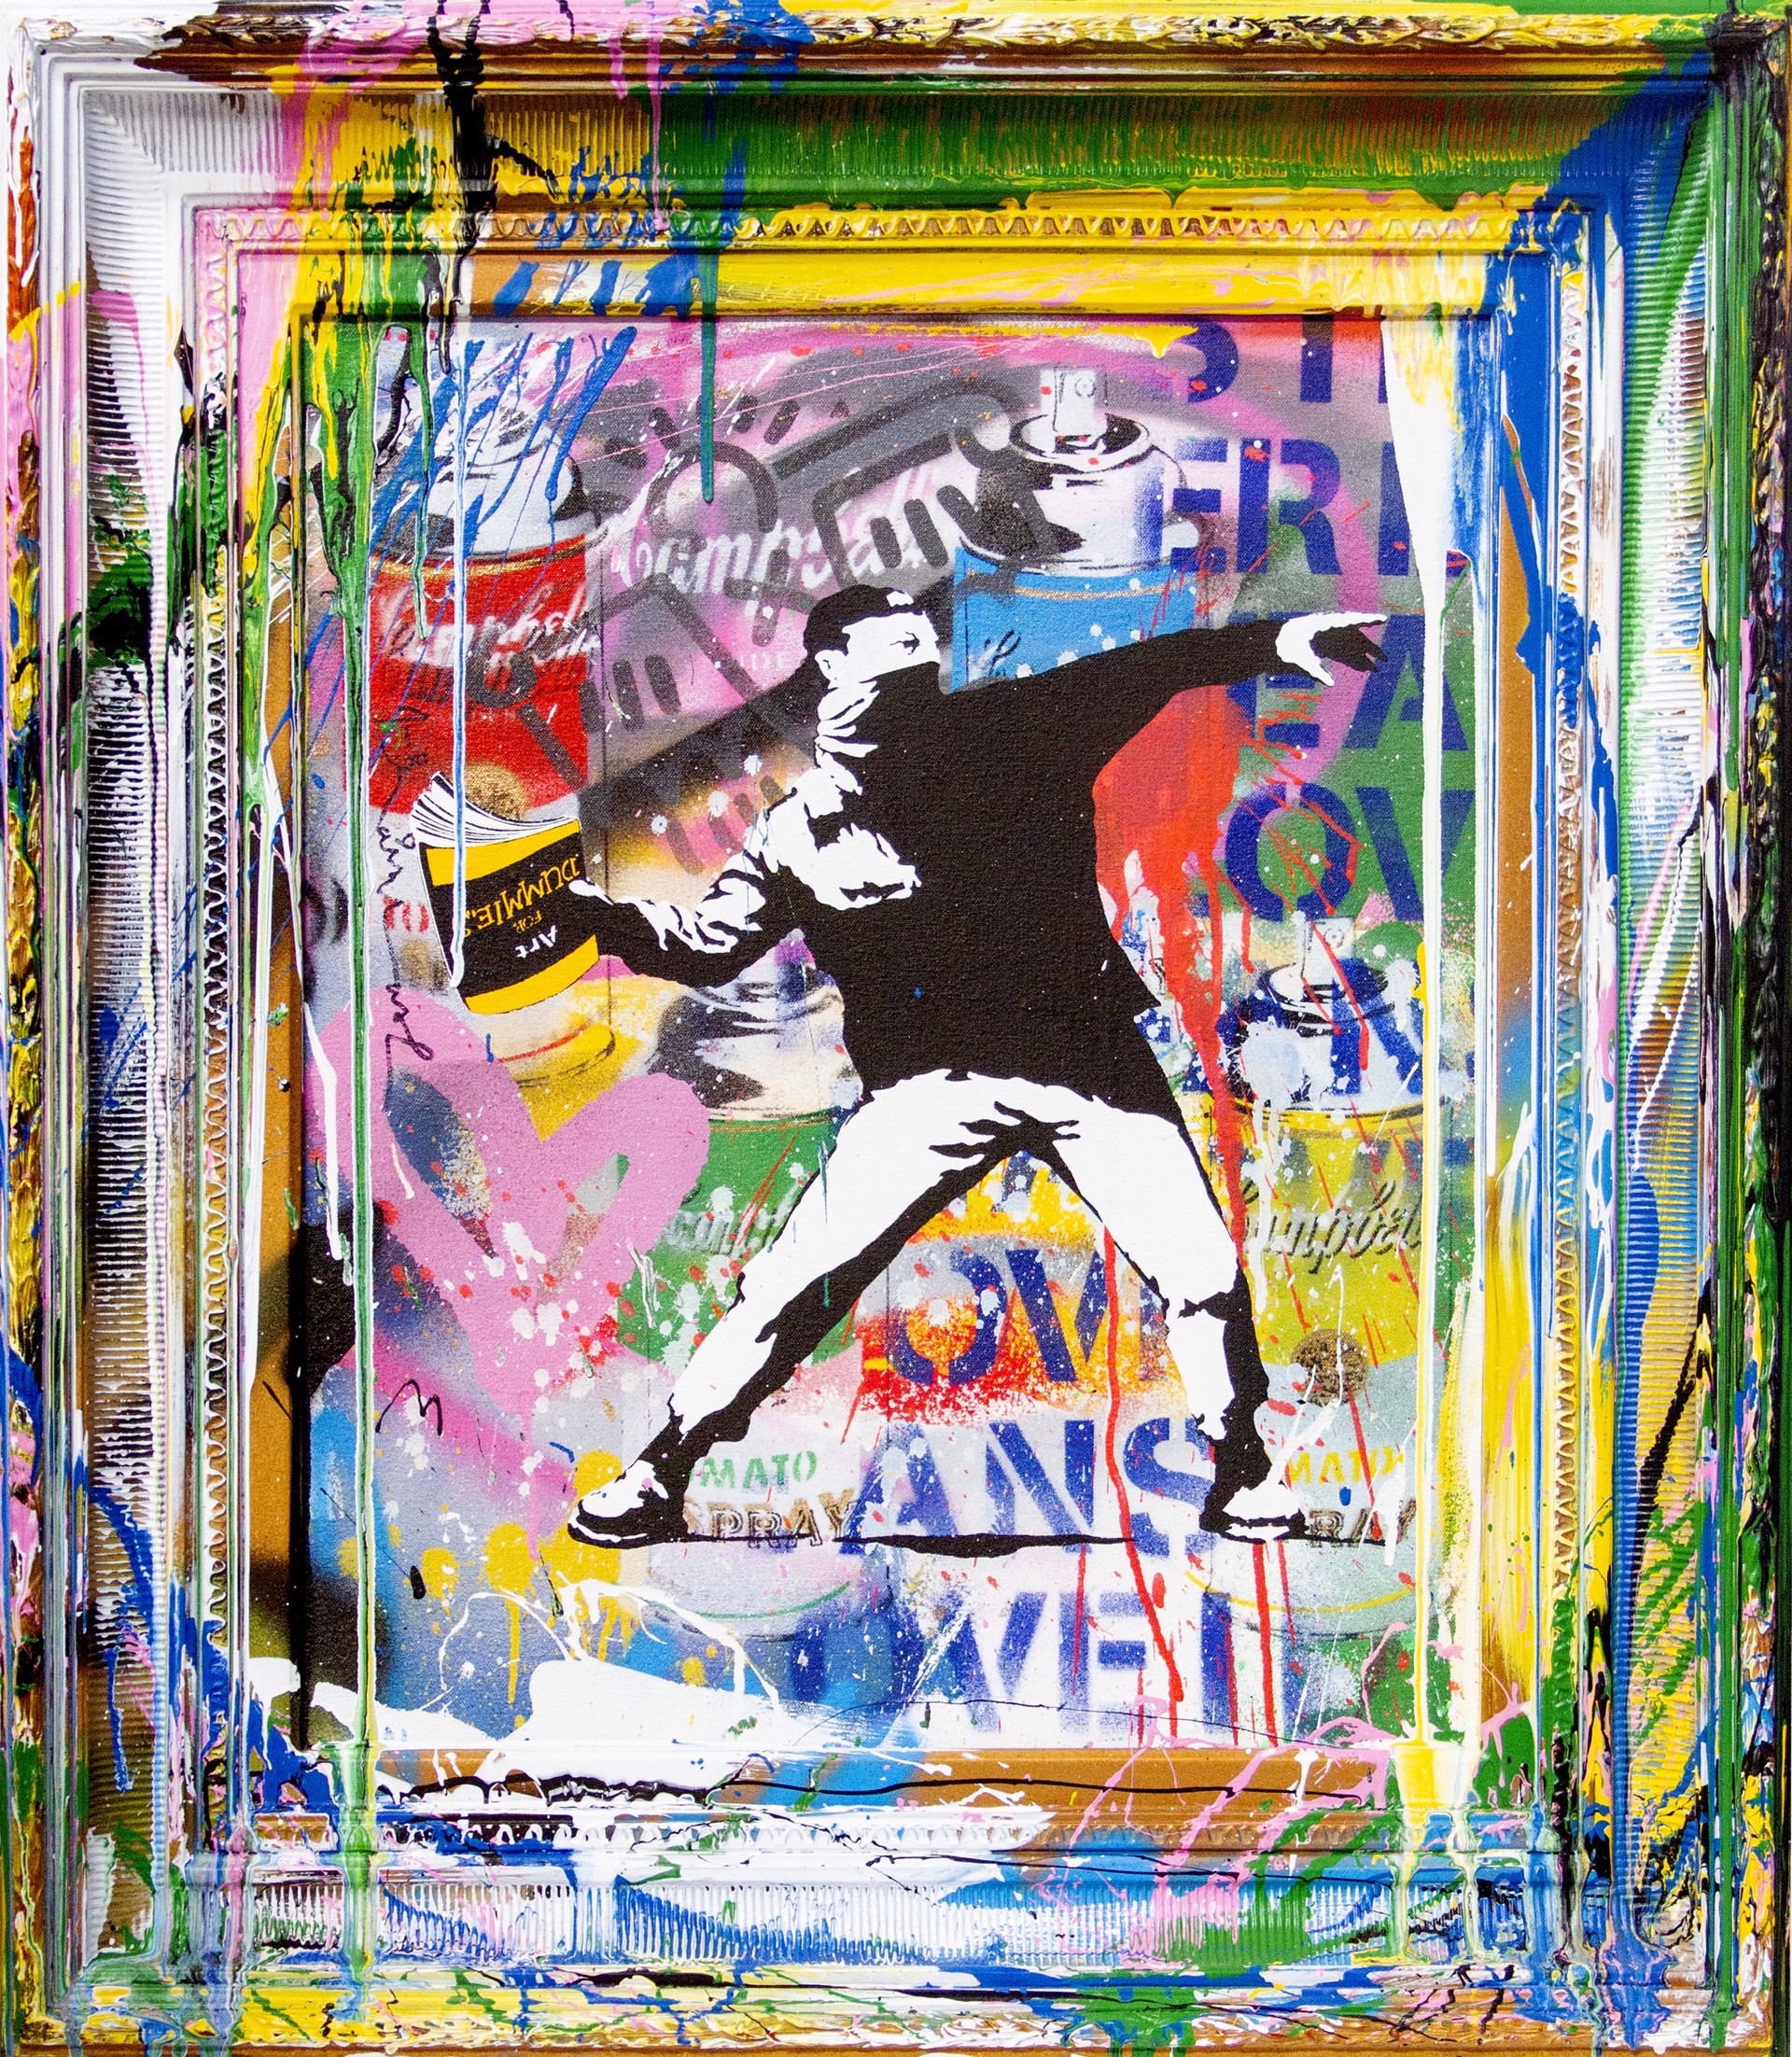 Banksy Thrower, Mr. Brainwash, 34 x 30 inches, Silkscreen and Mixed Media on Framed Canvas